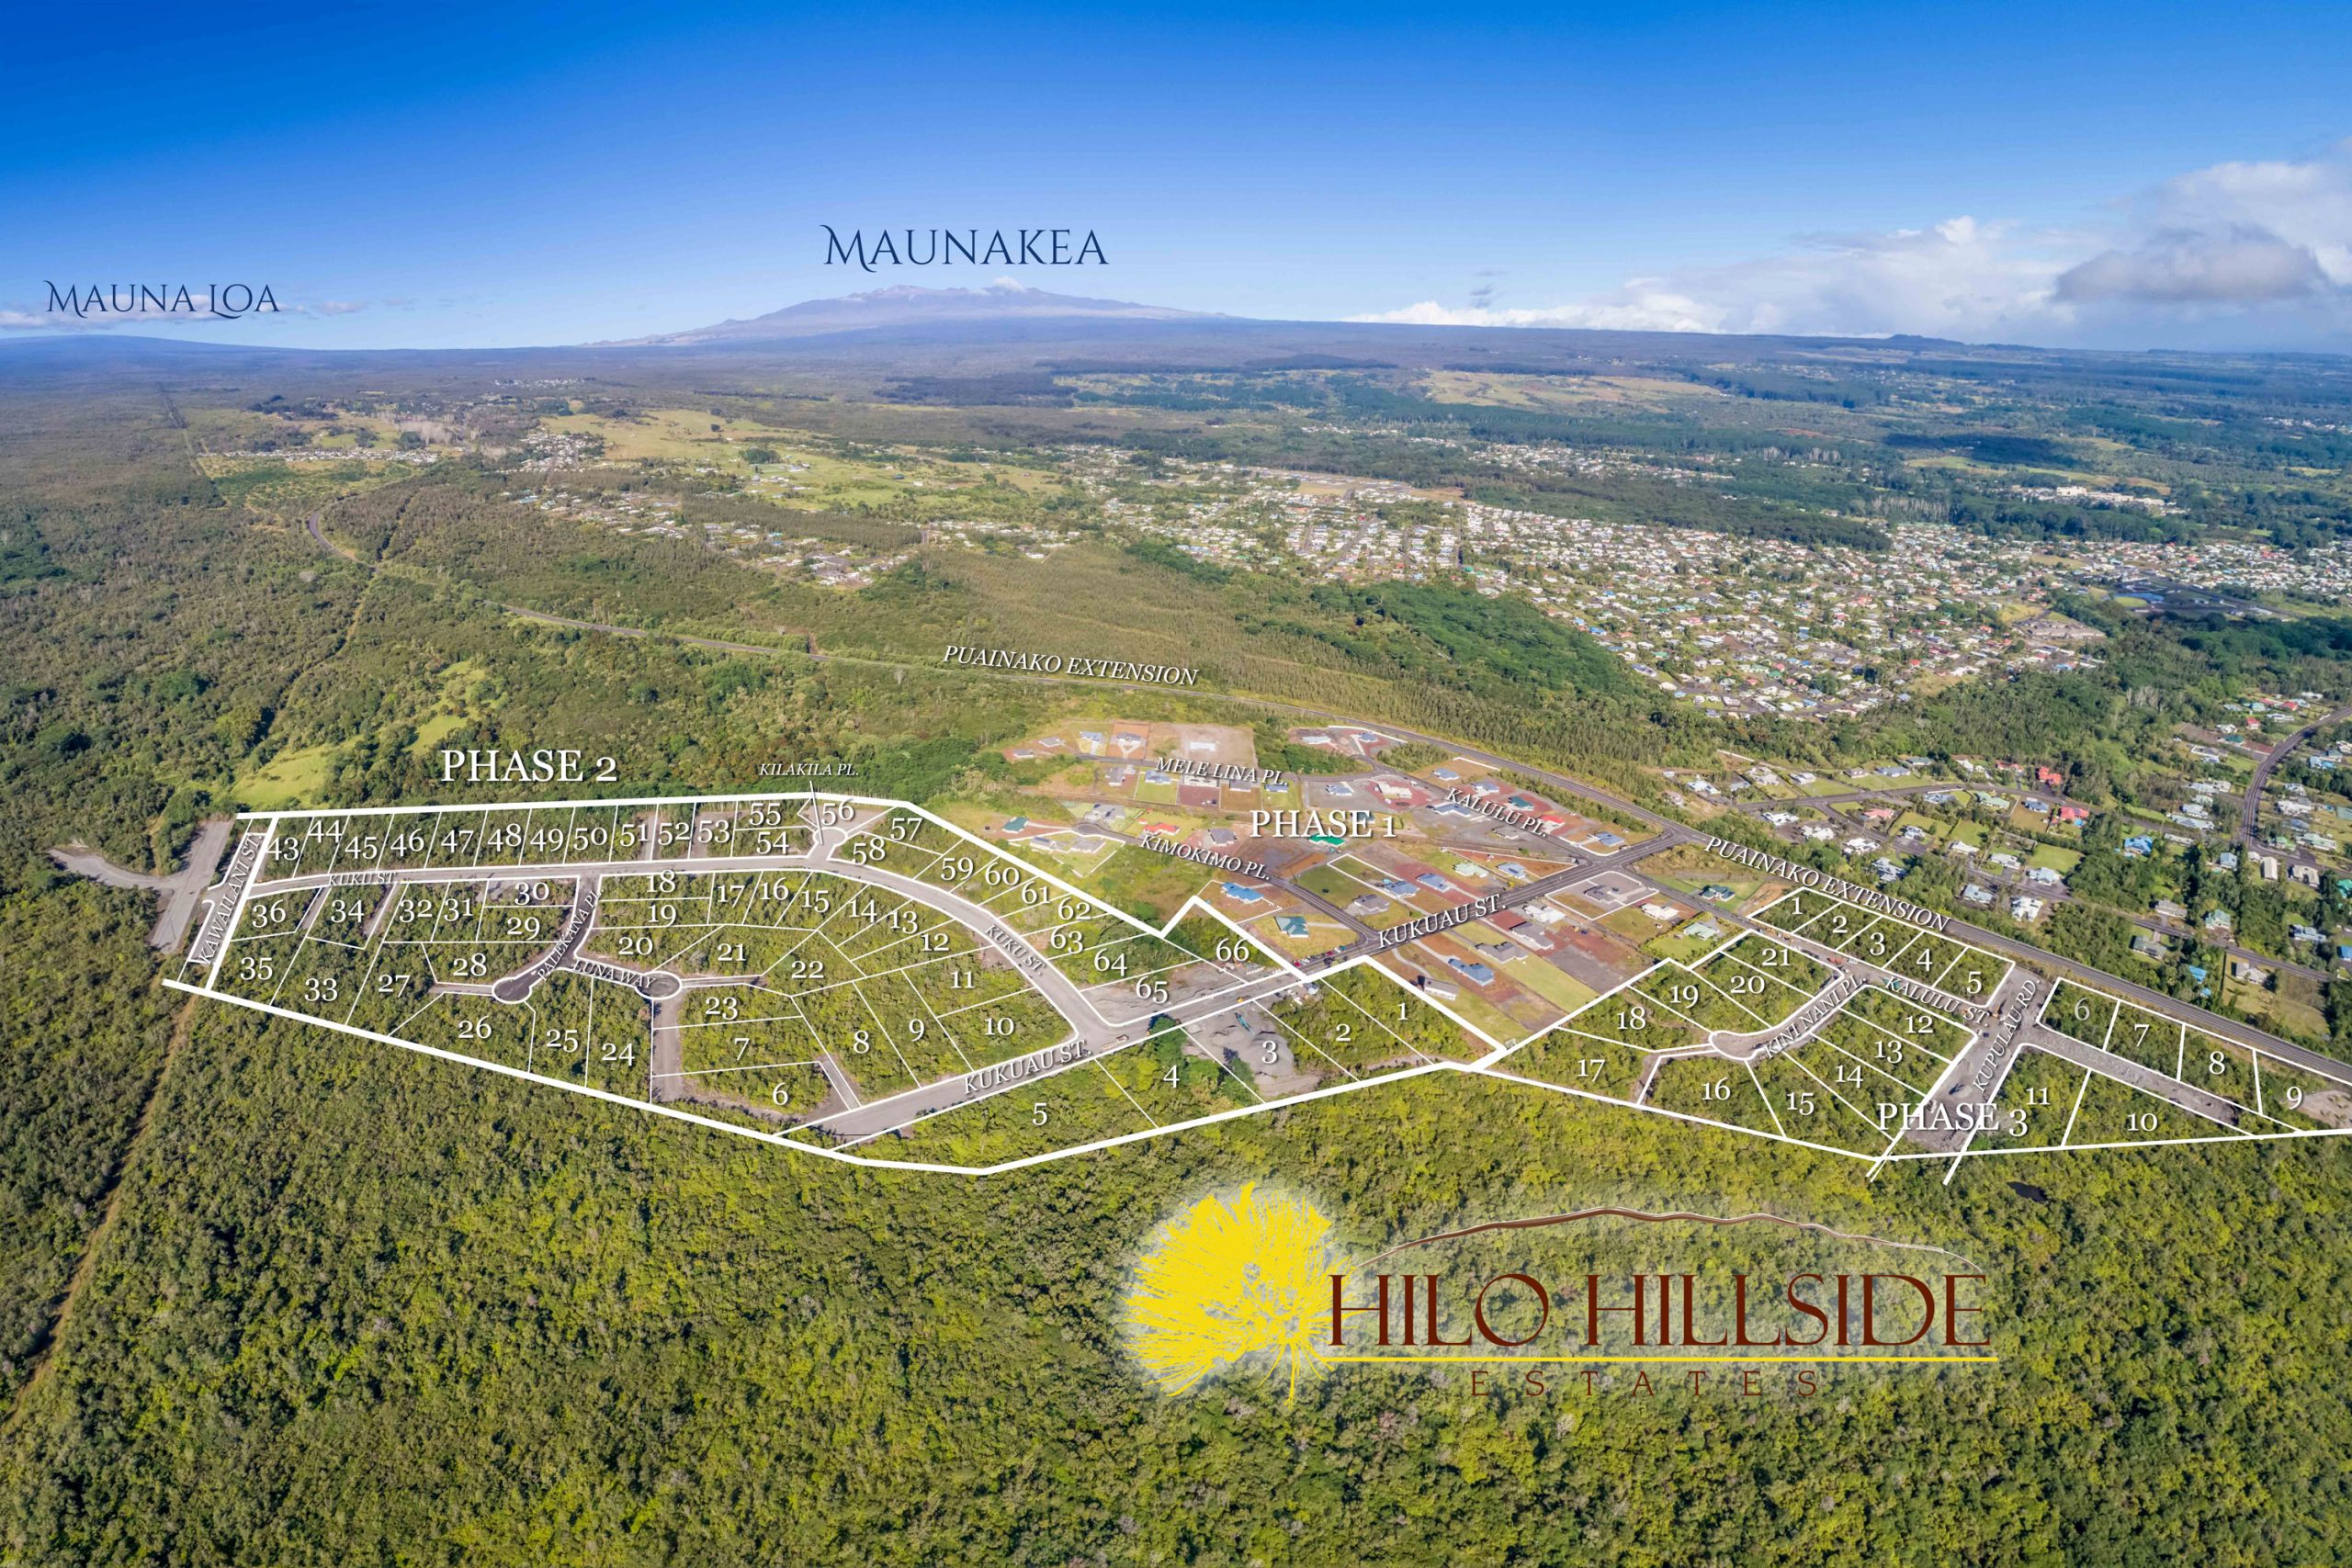 Hilo Hillside Phase 2&3 With Numbers